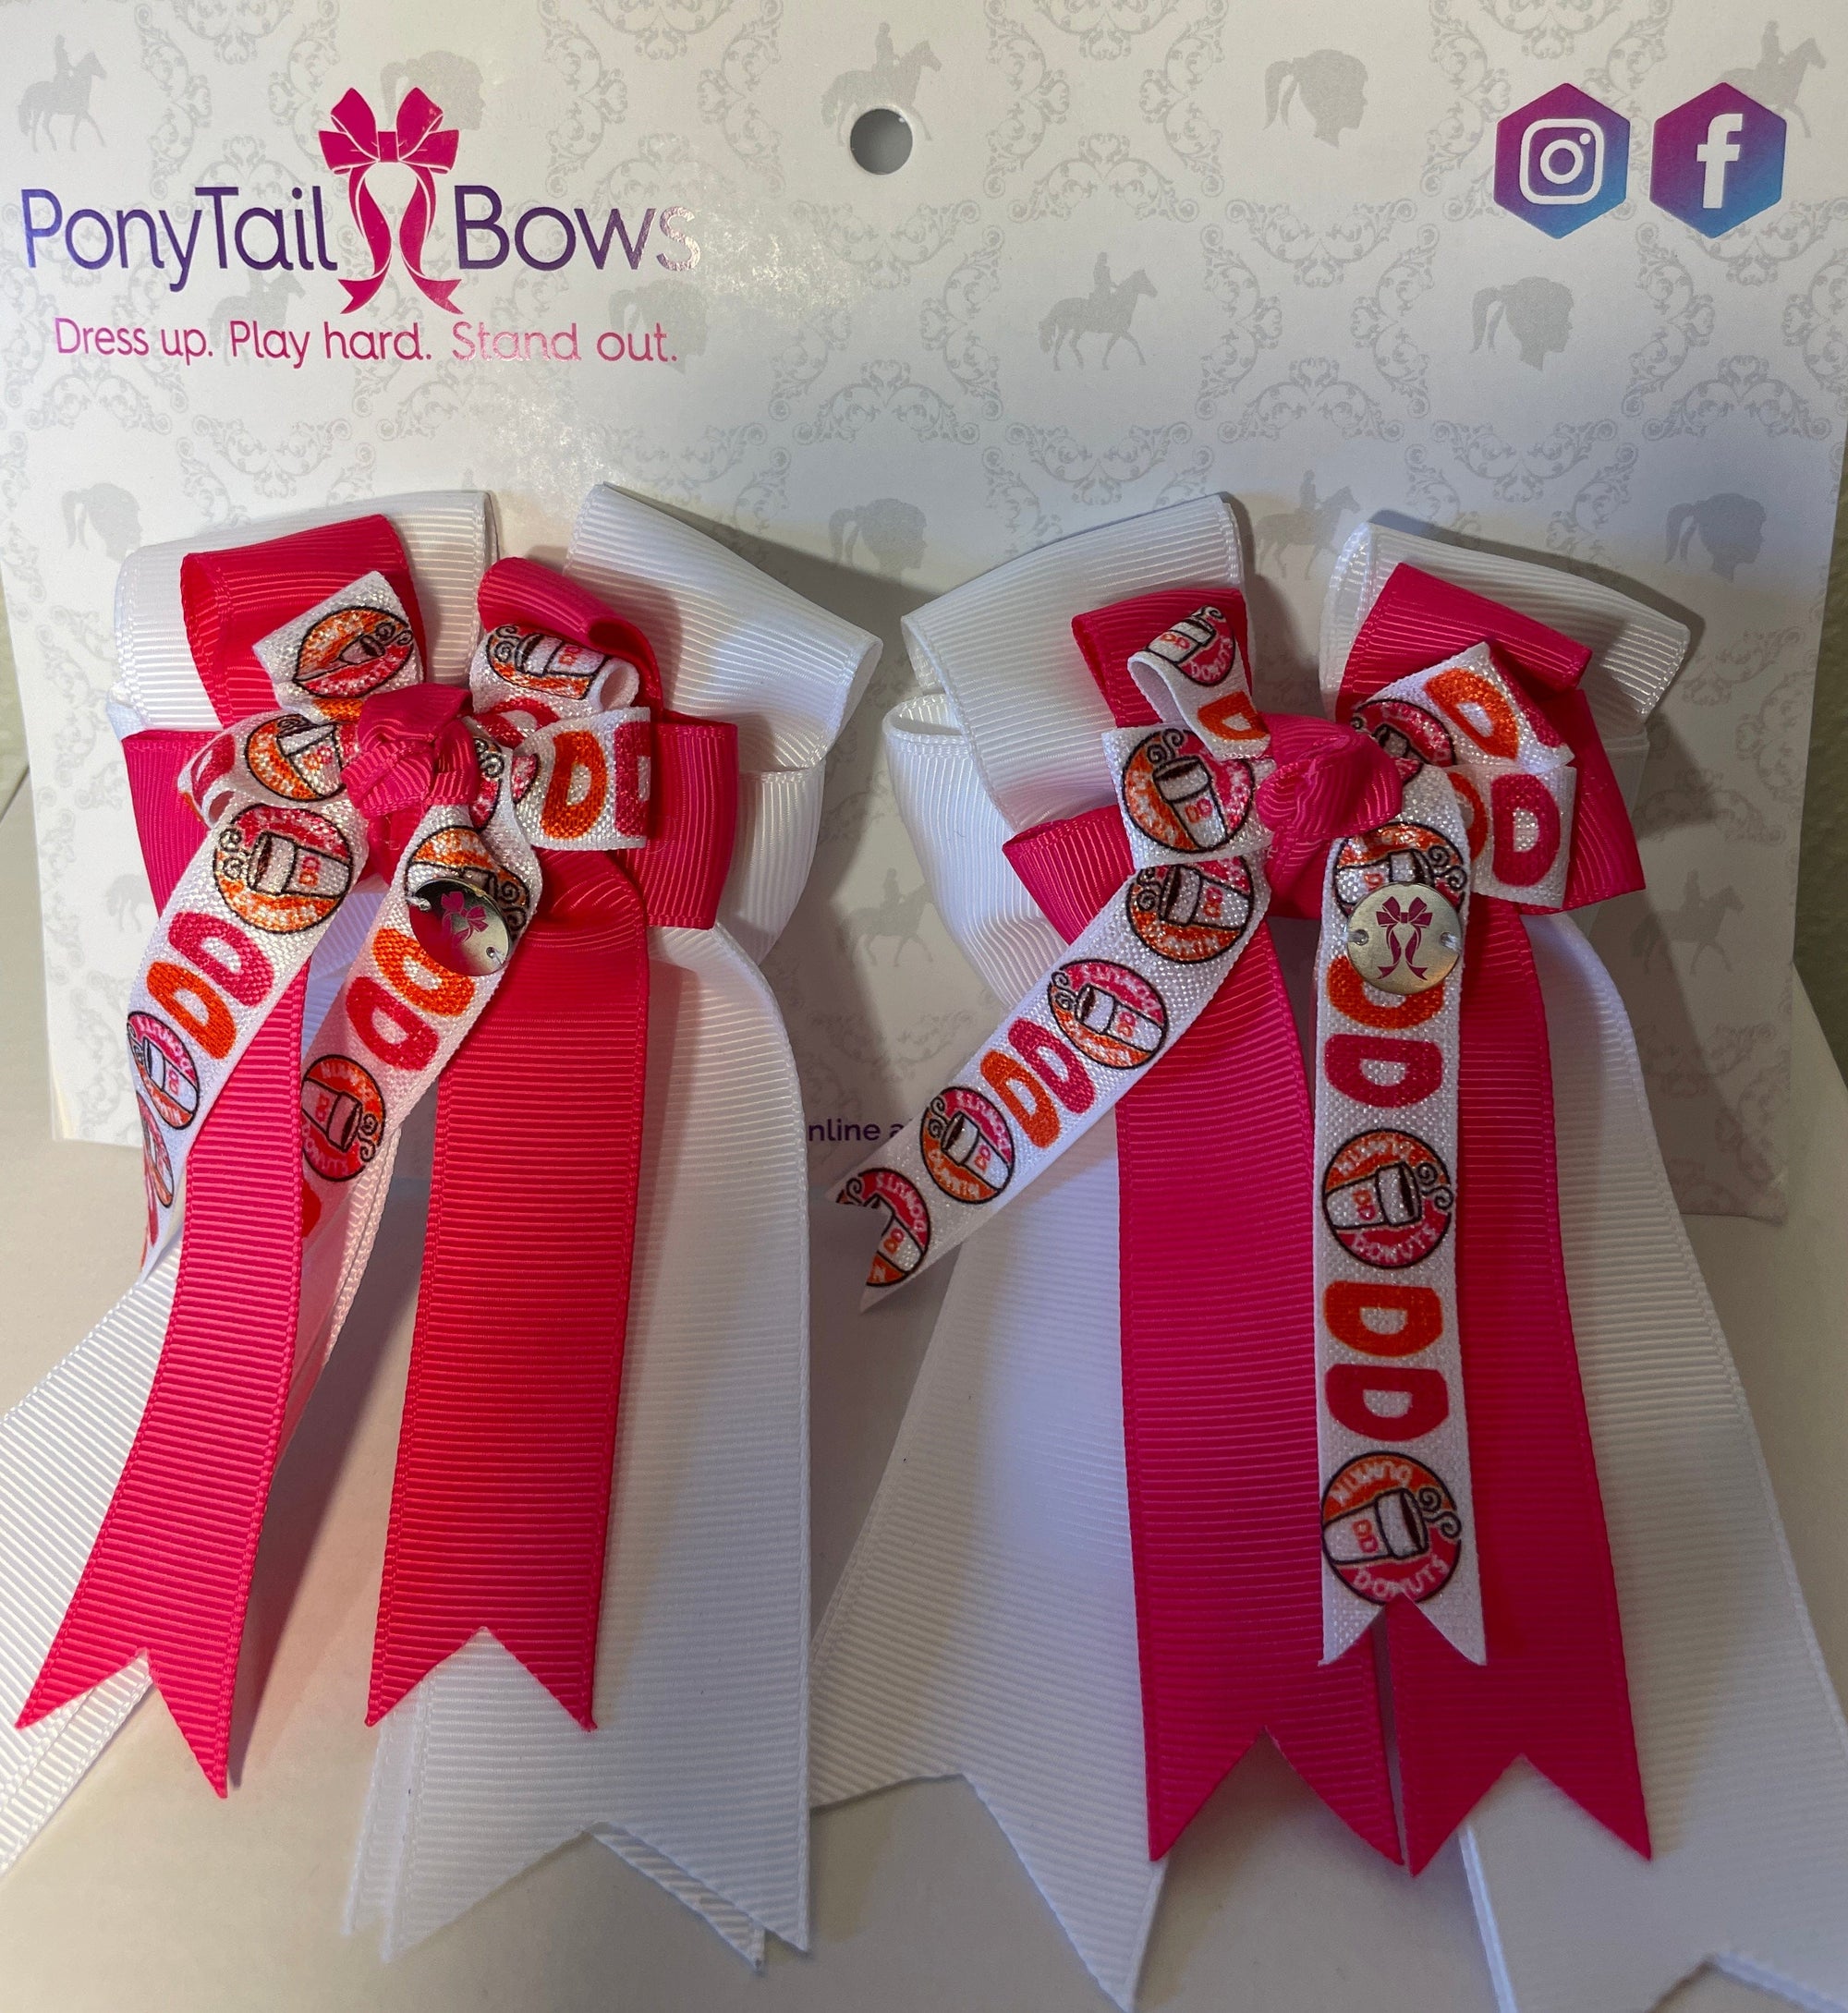 PonyTail Bows 3" Tails Dunkin Pink PonyTail Bows equestrian team apparel online tack store mobile tack store custom farm apparel custom show stable clothing equestrian lifestyle horse show clothing riding clothes PonyTail Bows | Equestrian Hair Accessories horses equestrian tack store